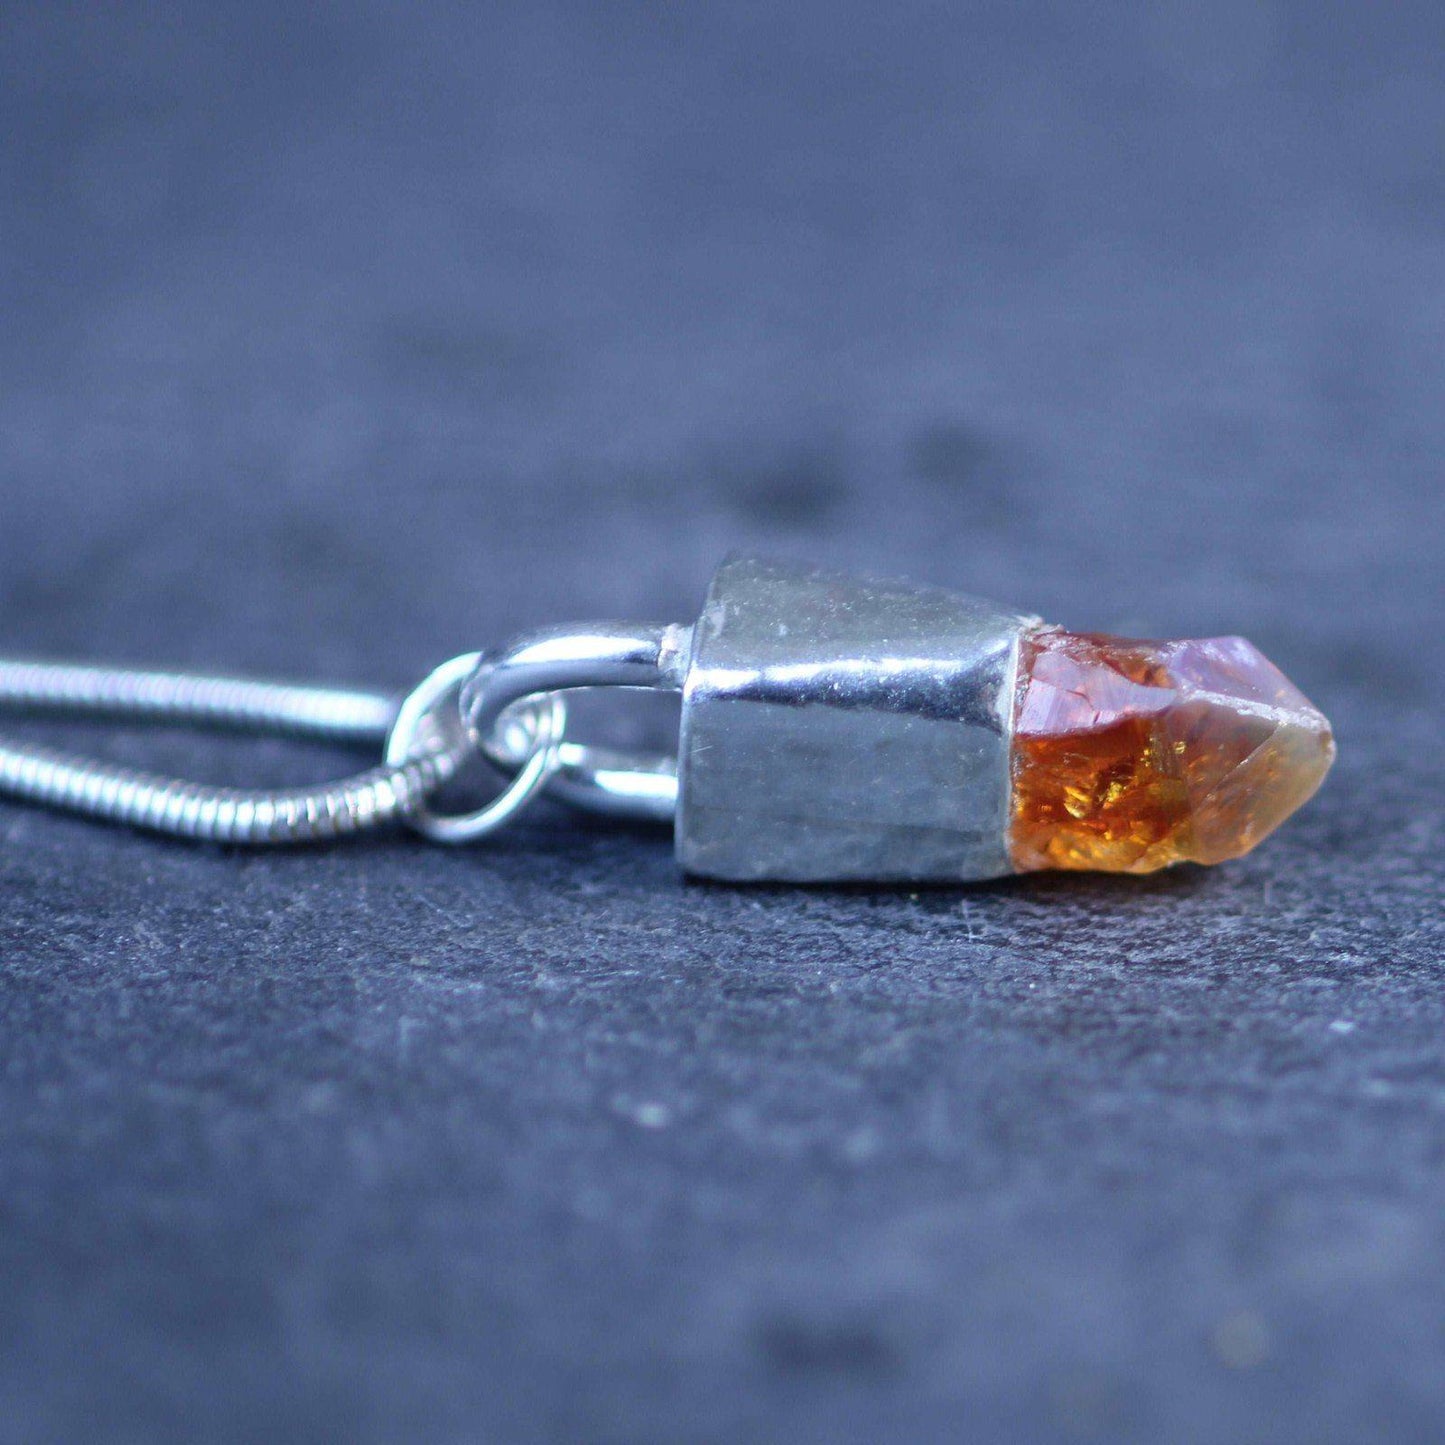 Raw citrine crystal necklace